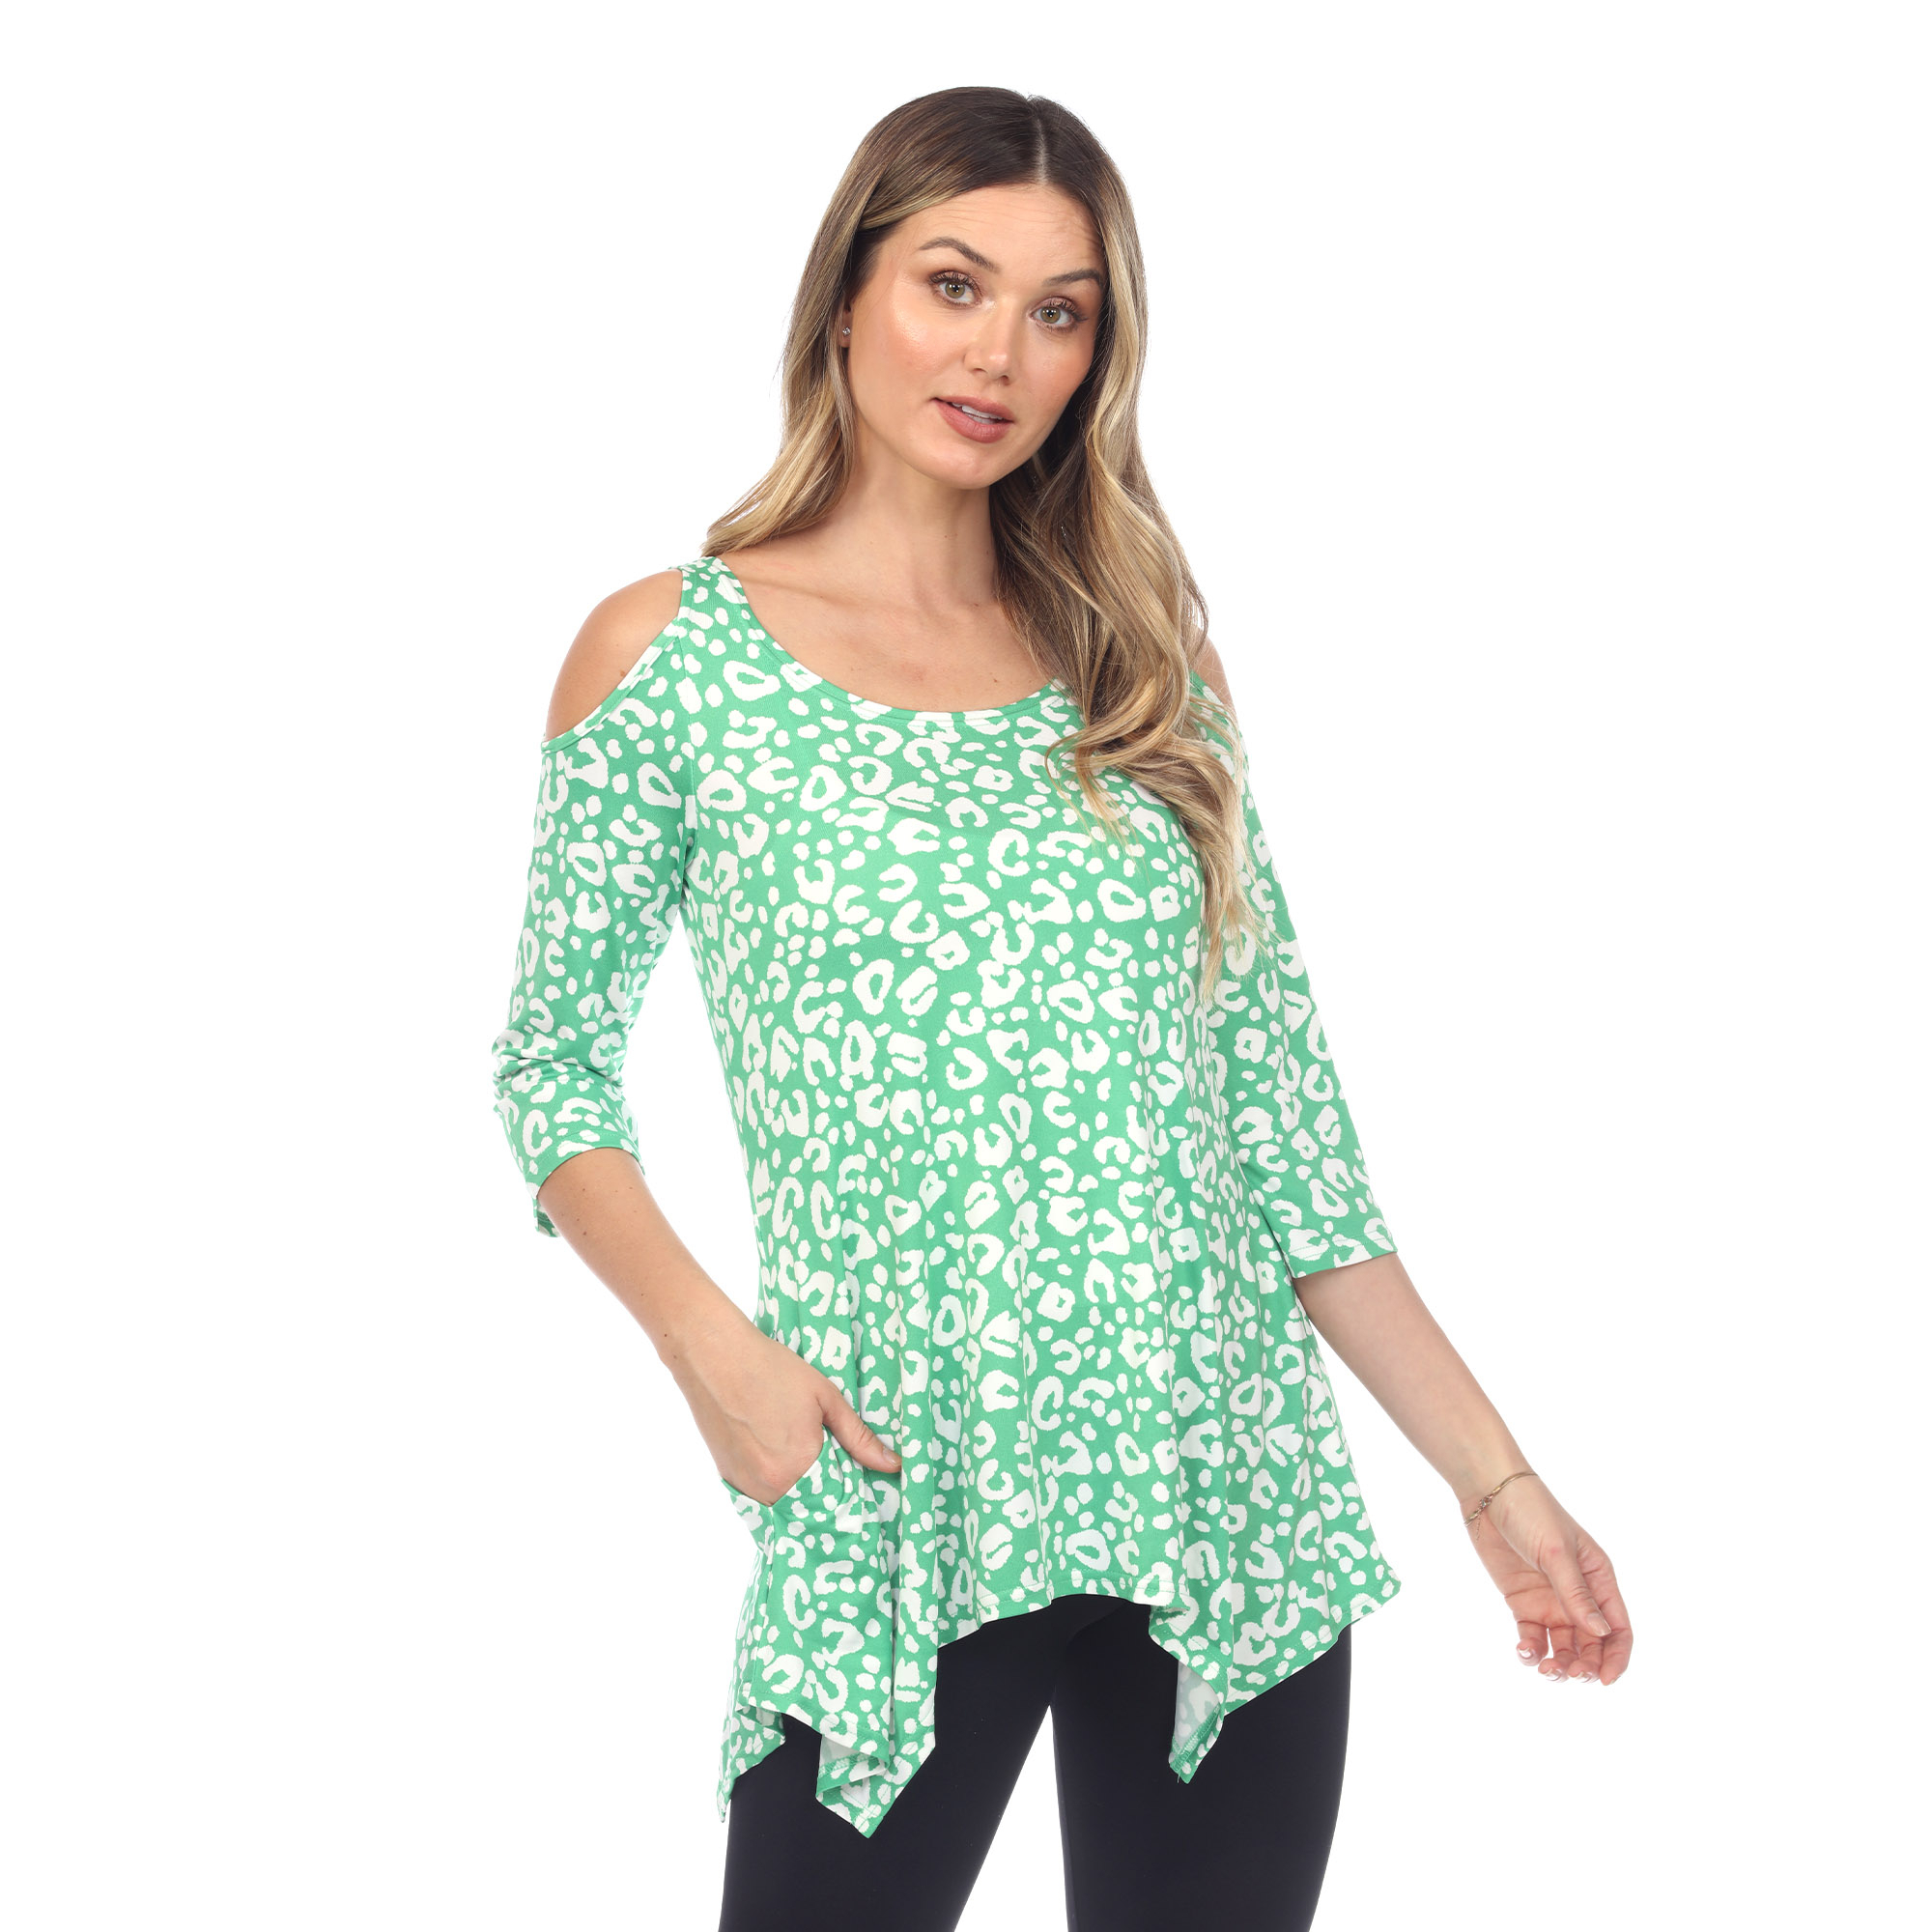 White Mark Women's Leopard Print Cold Shoulder Tunic Top With Pockets - Green, Medium